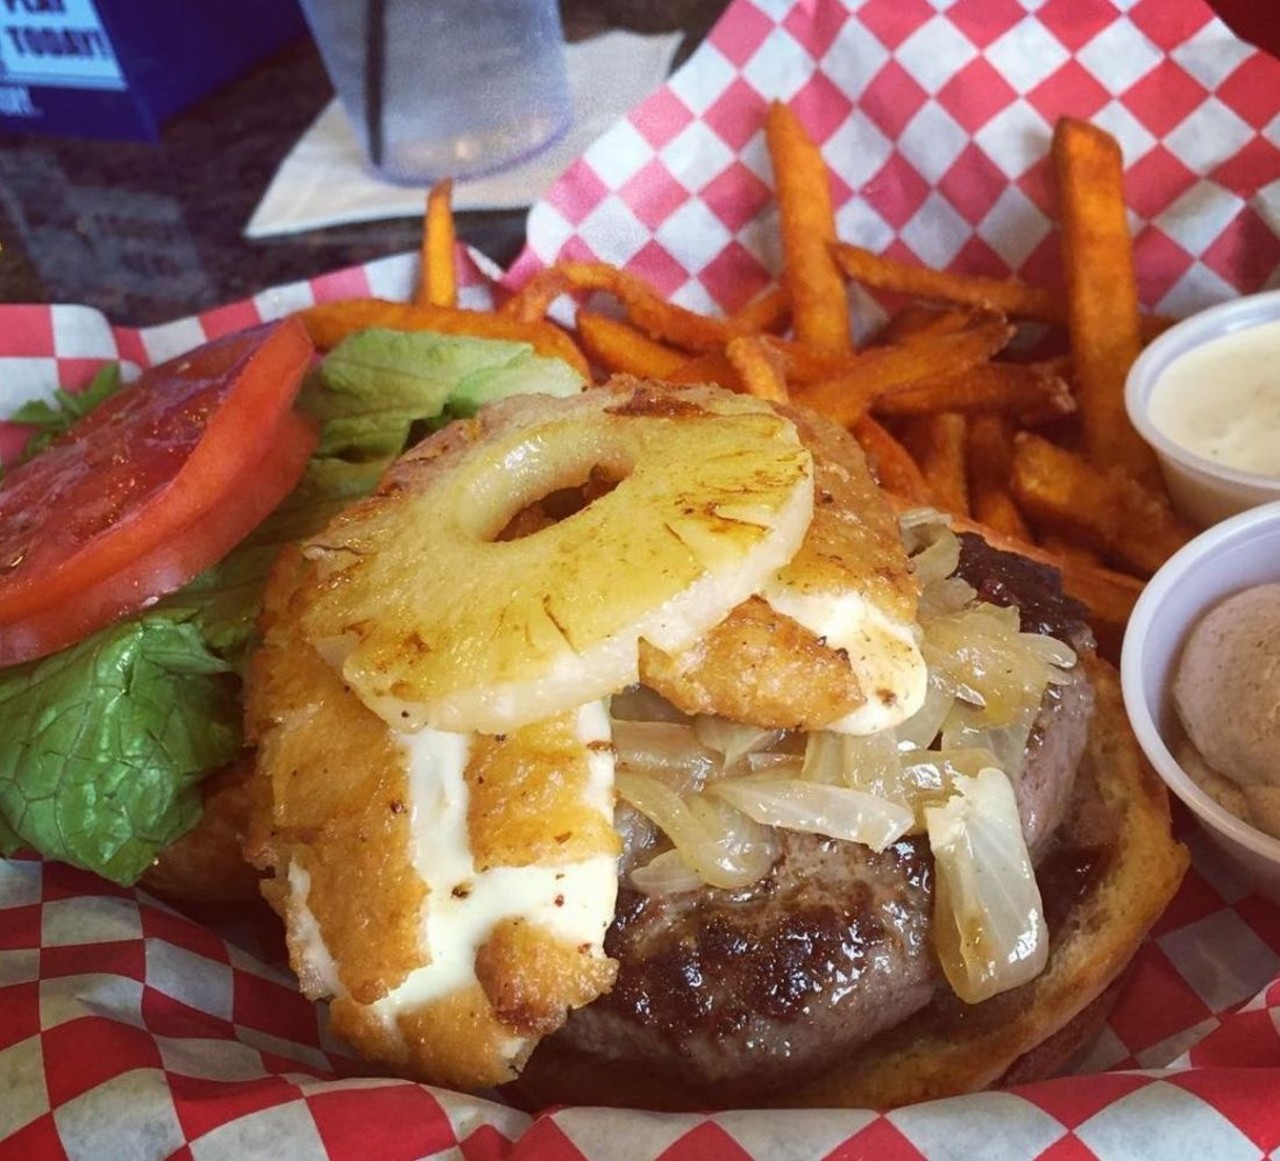 Basement Burger Bar
1326 Brush St, Detroit
This cheese stick, pineapple, and grilled onion burger is arguably cheating because a customer put it together off the Burger Basement Bar's create-your-own burger menu. But we're giving it a nod because it's both highly creative and surprisingly tempting.  (Via basementburgerbar and ahmedtheawesome on Instagram)